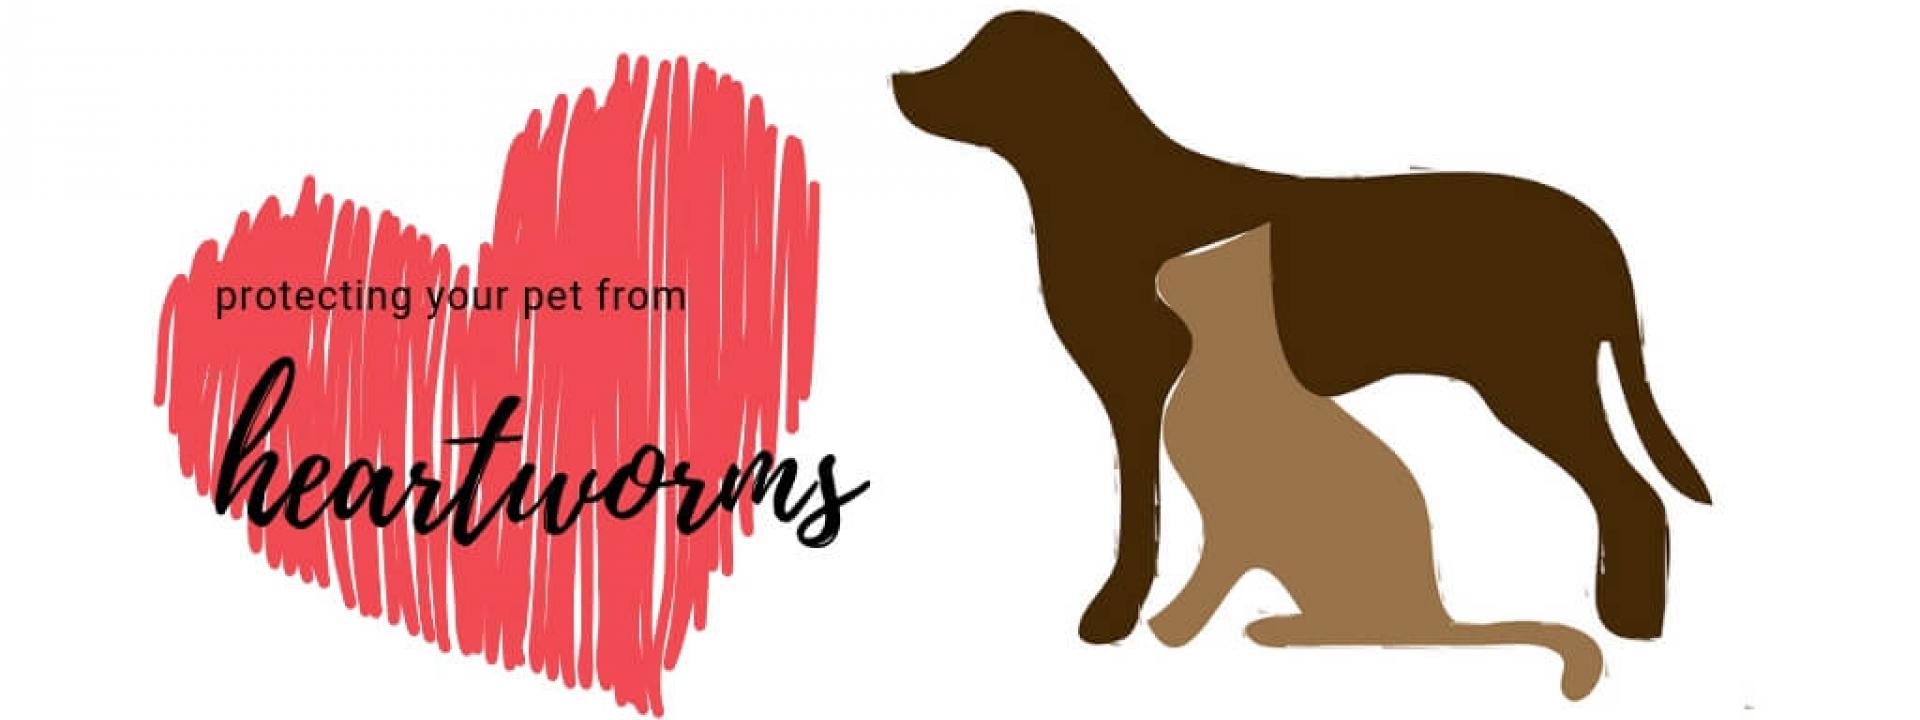 protect-from-heartworms-blog-header.jpg